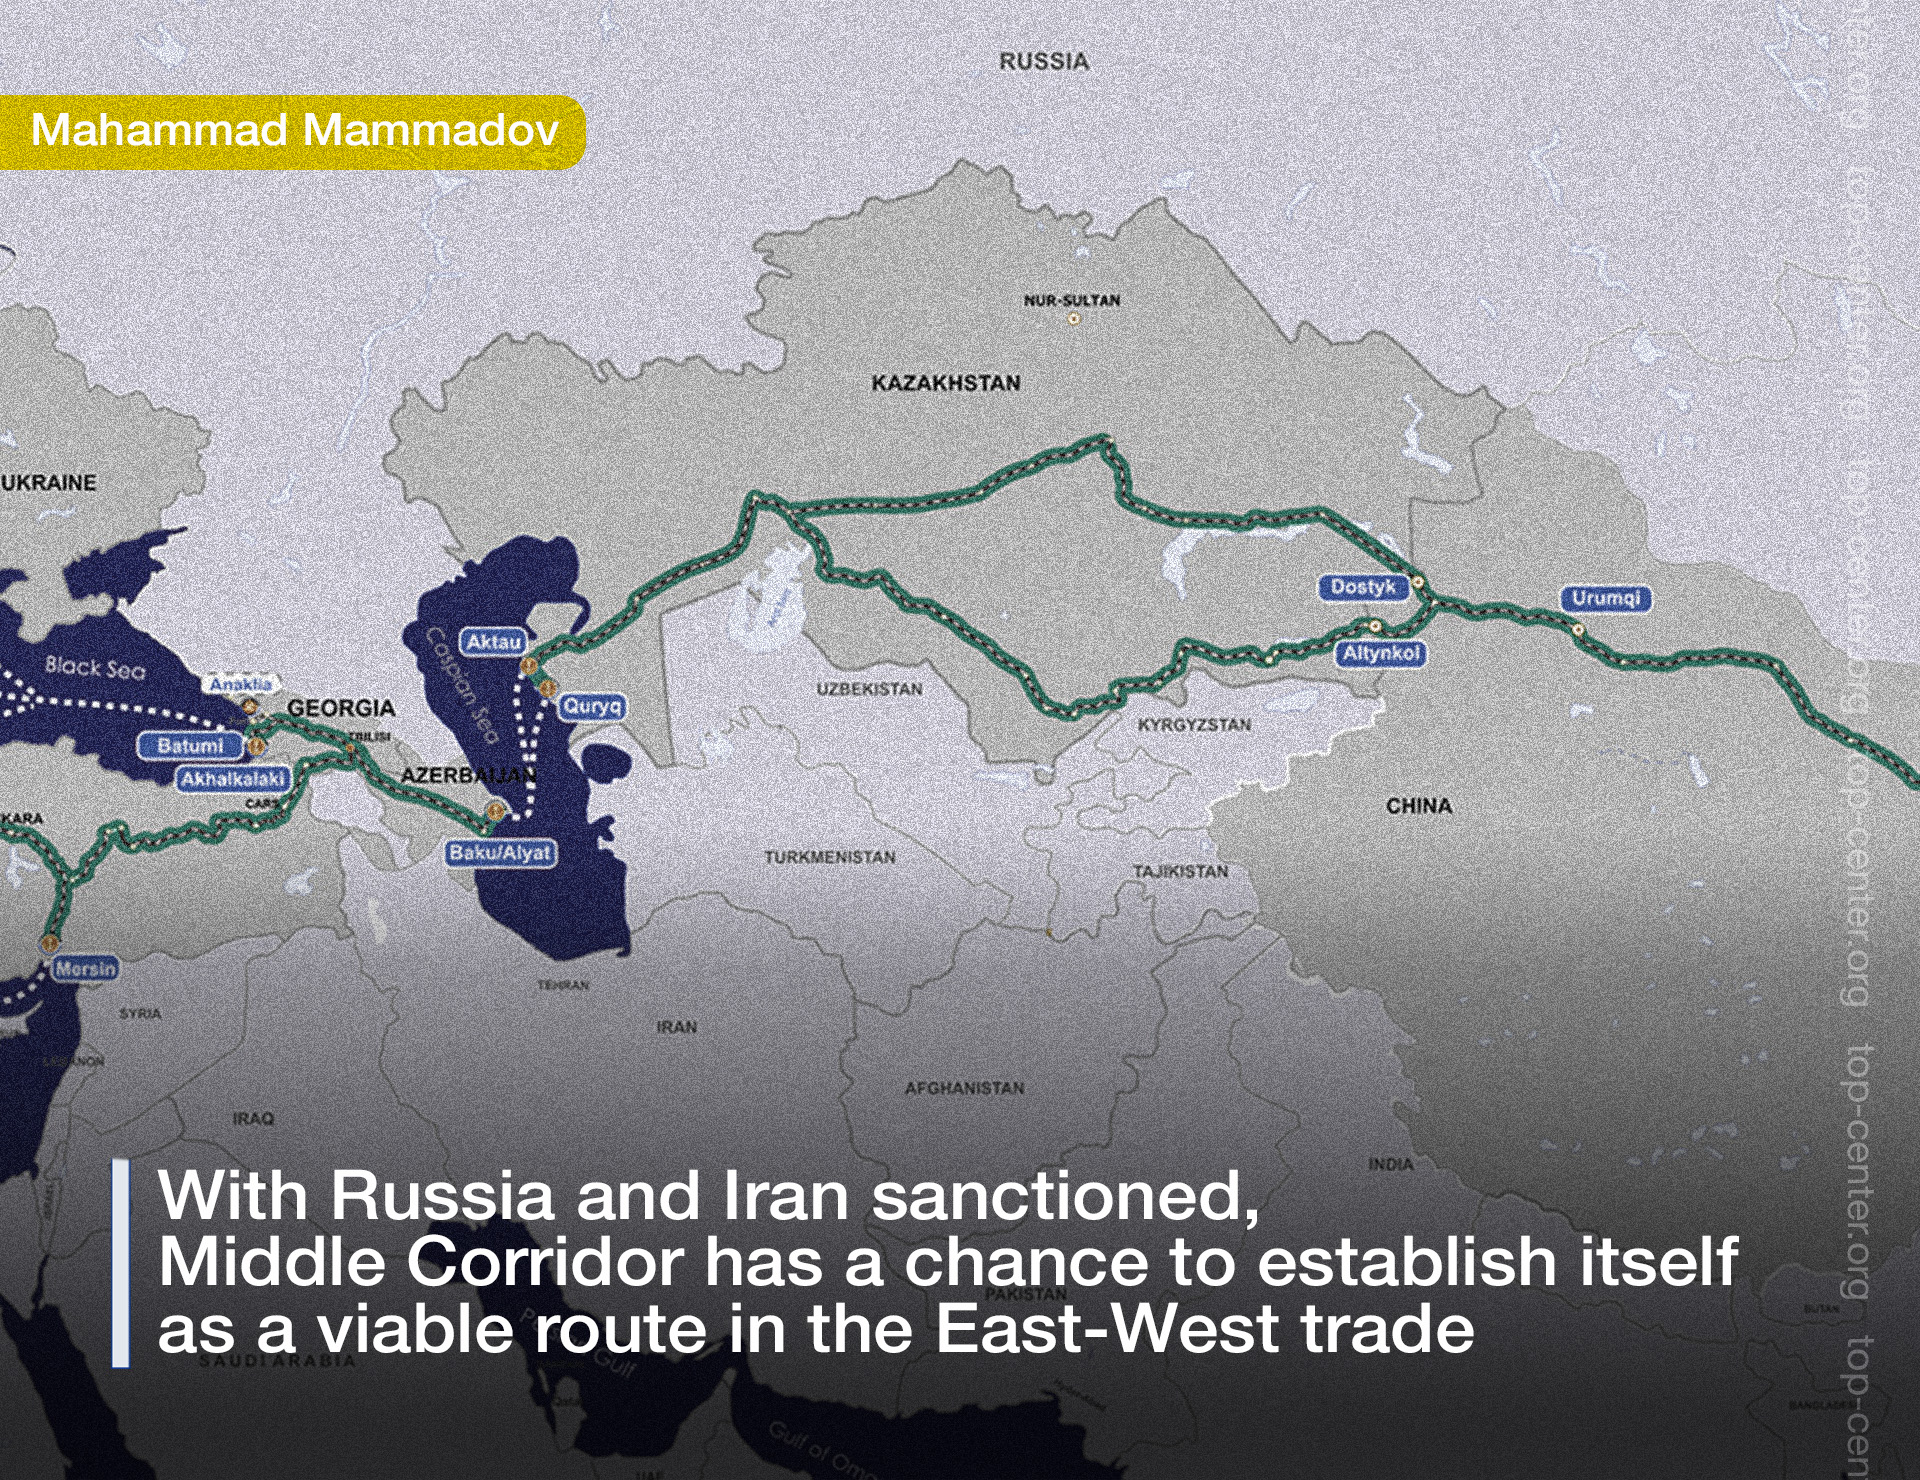 With Russia and Iran sanctioned, Middle Corridor has a chance to establish itself as a viable route in the East-West trade